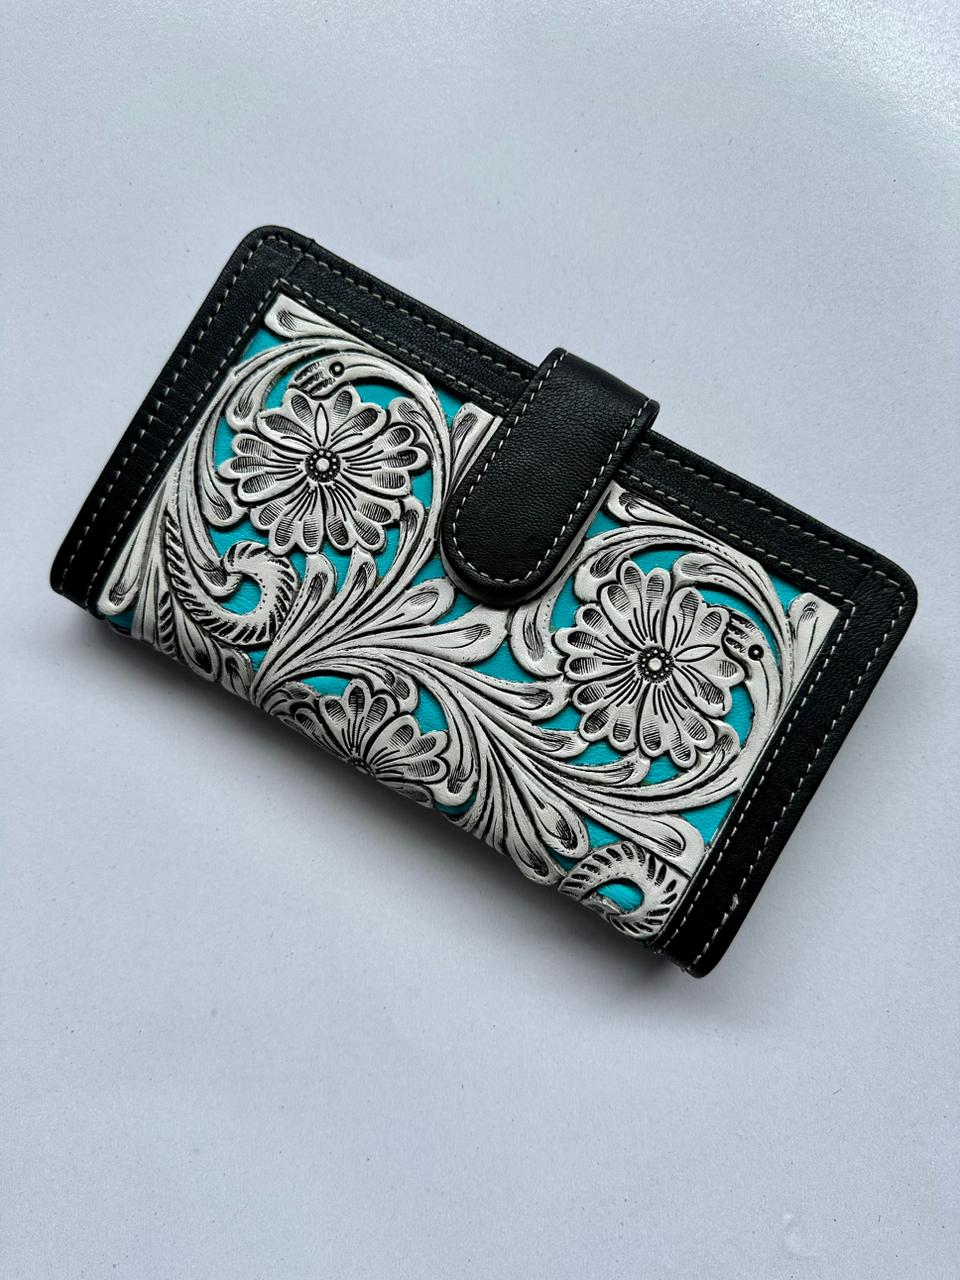 The Design Edge Tooling Leather Carved Clutch Wallet with Turquoise Base